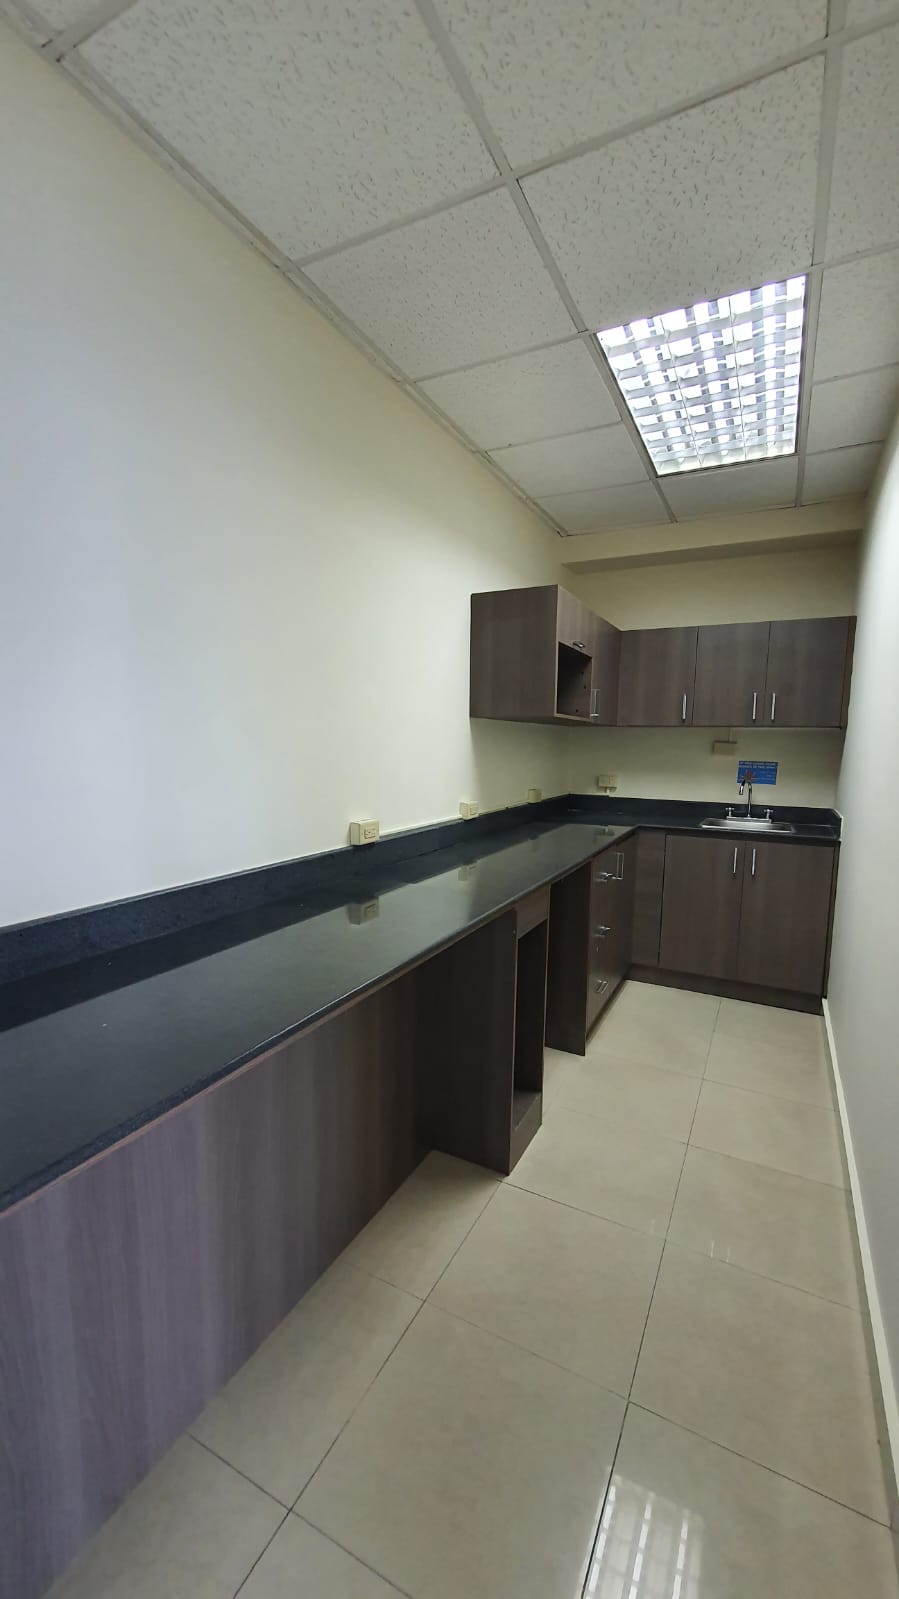 Office Space in Torre Global Bank, Calle 50 - PLS-19840